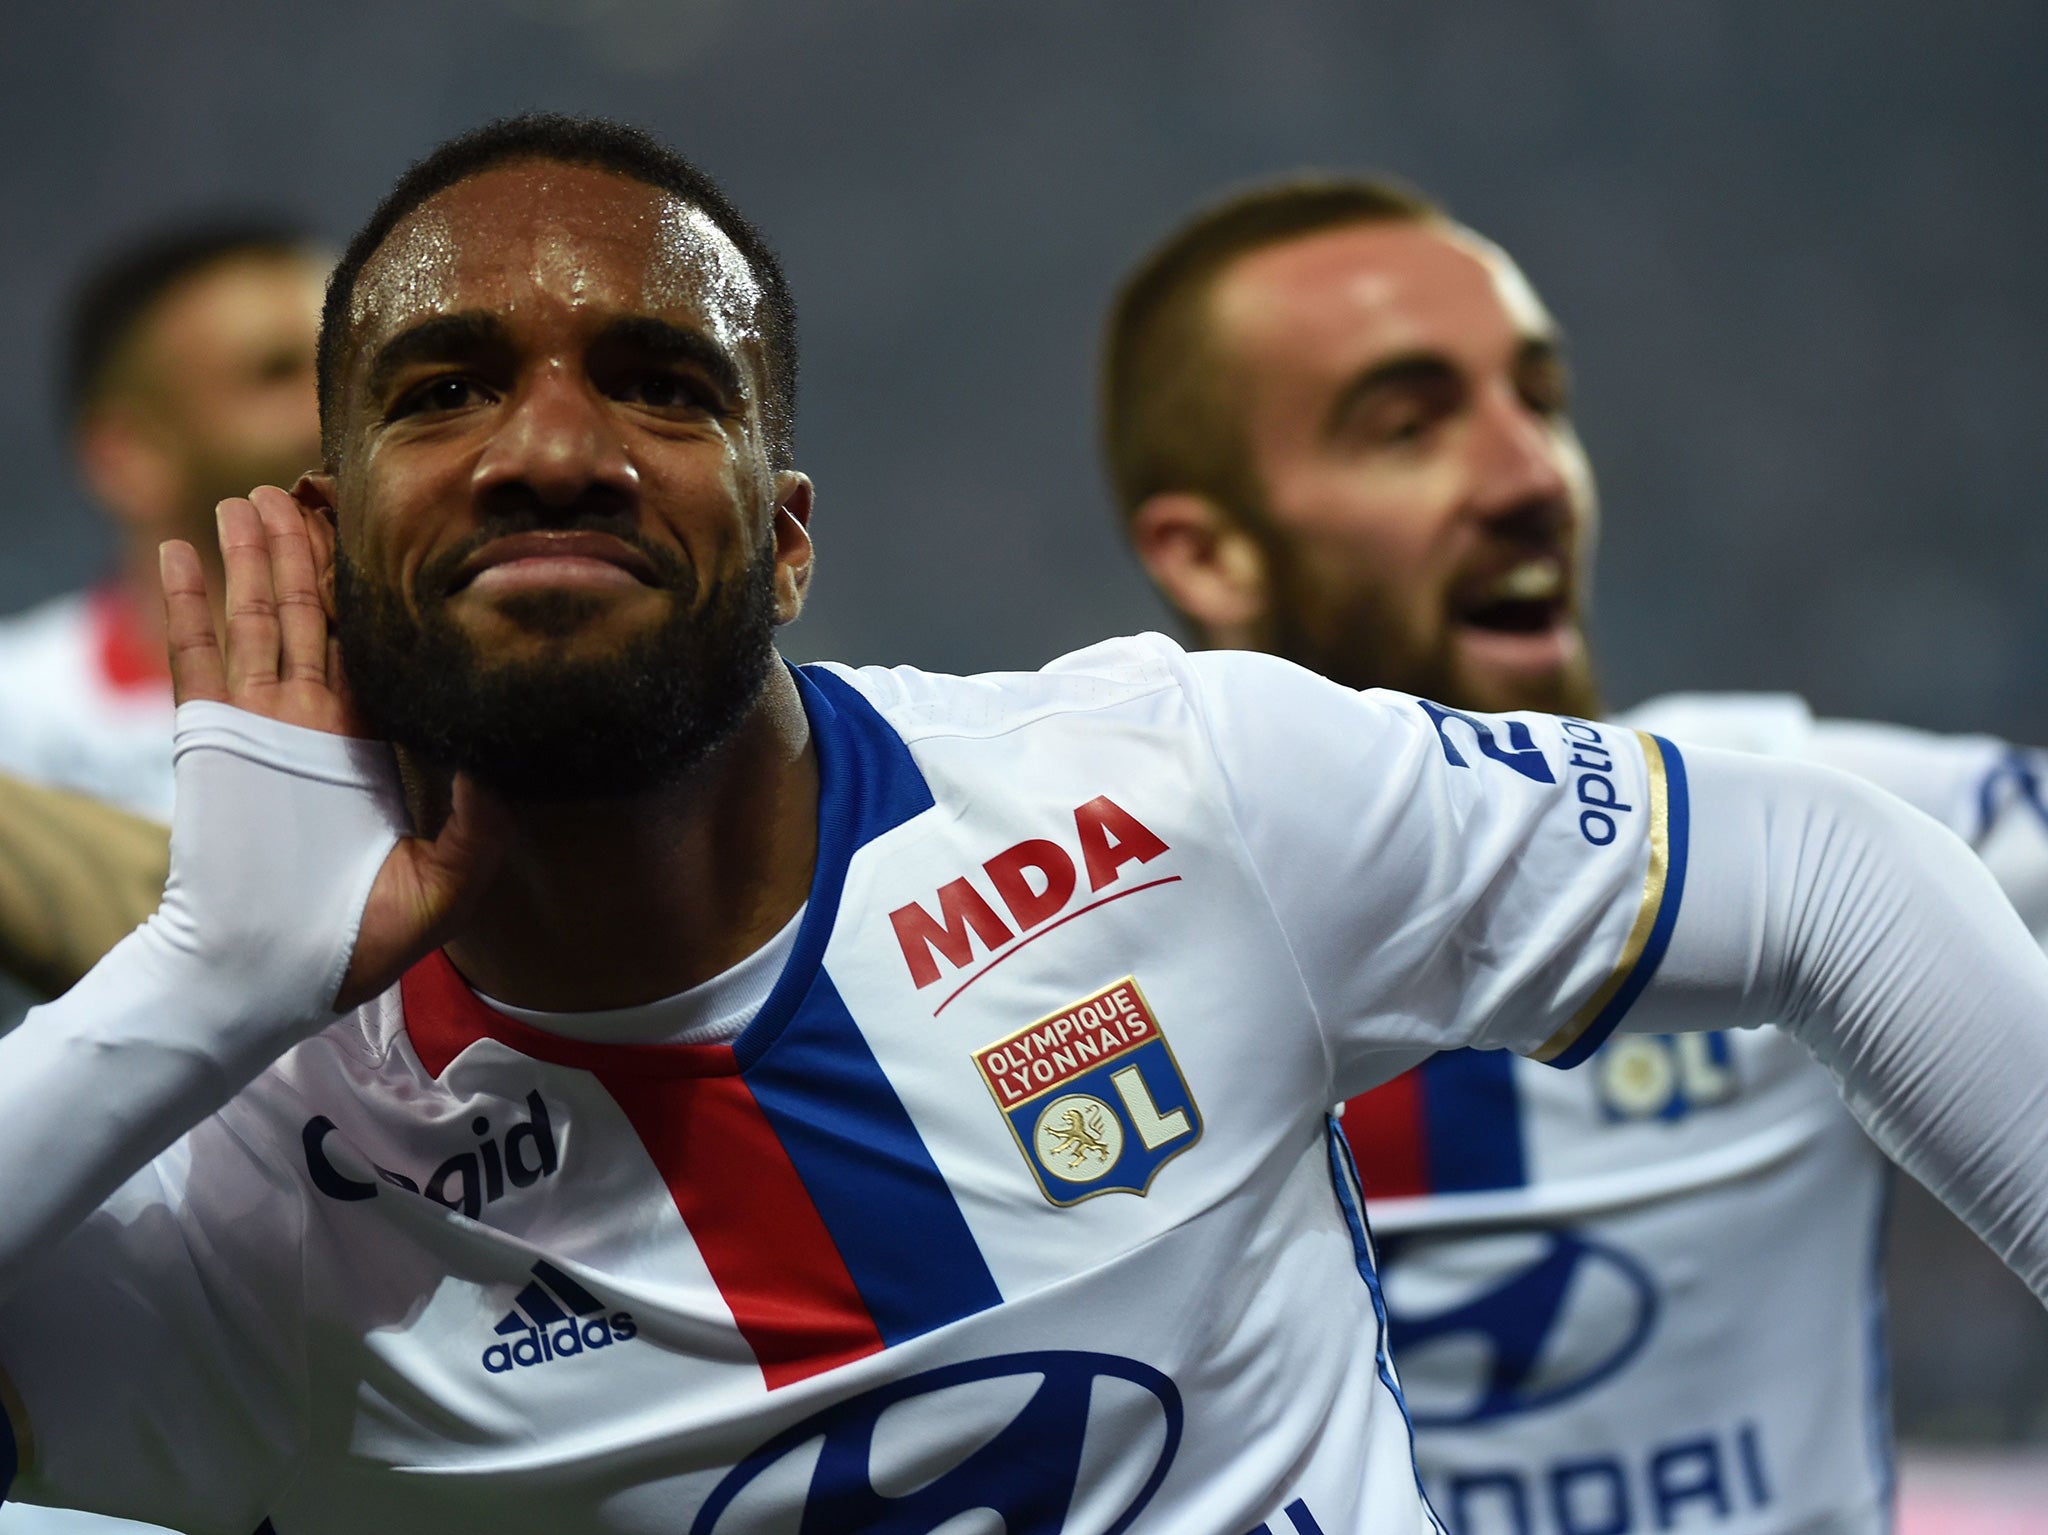 &#13;
Arsenal have already had a £29m offer for Lacazette rejected &#13;